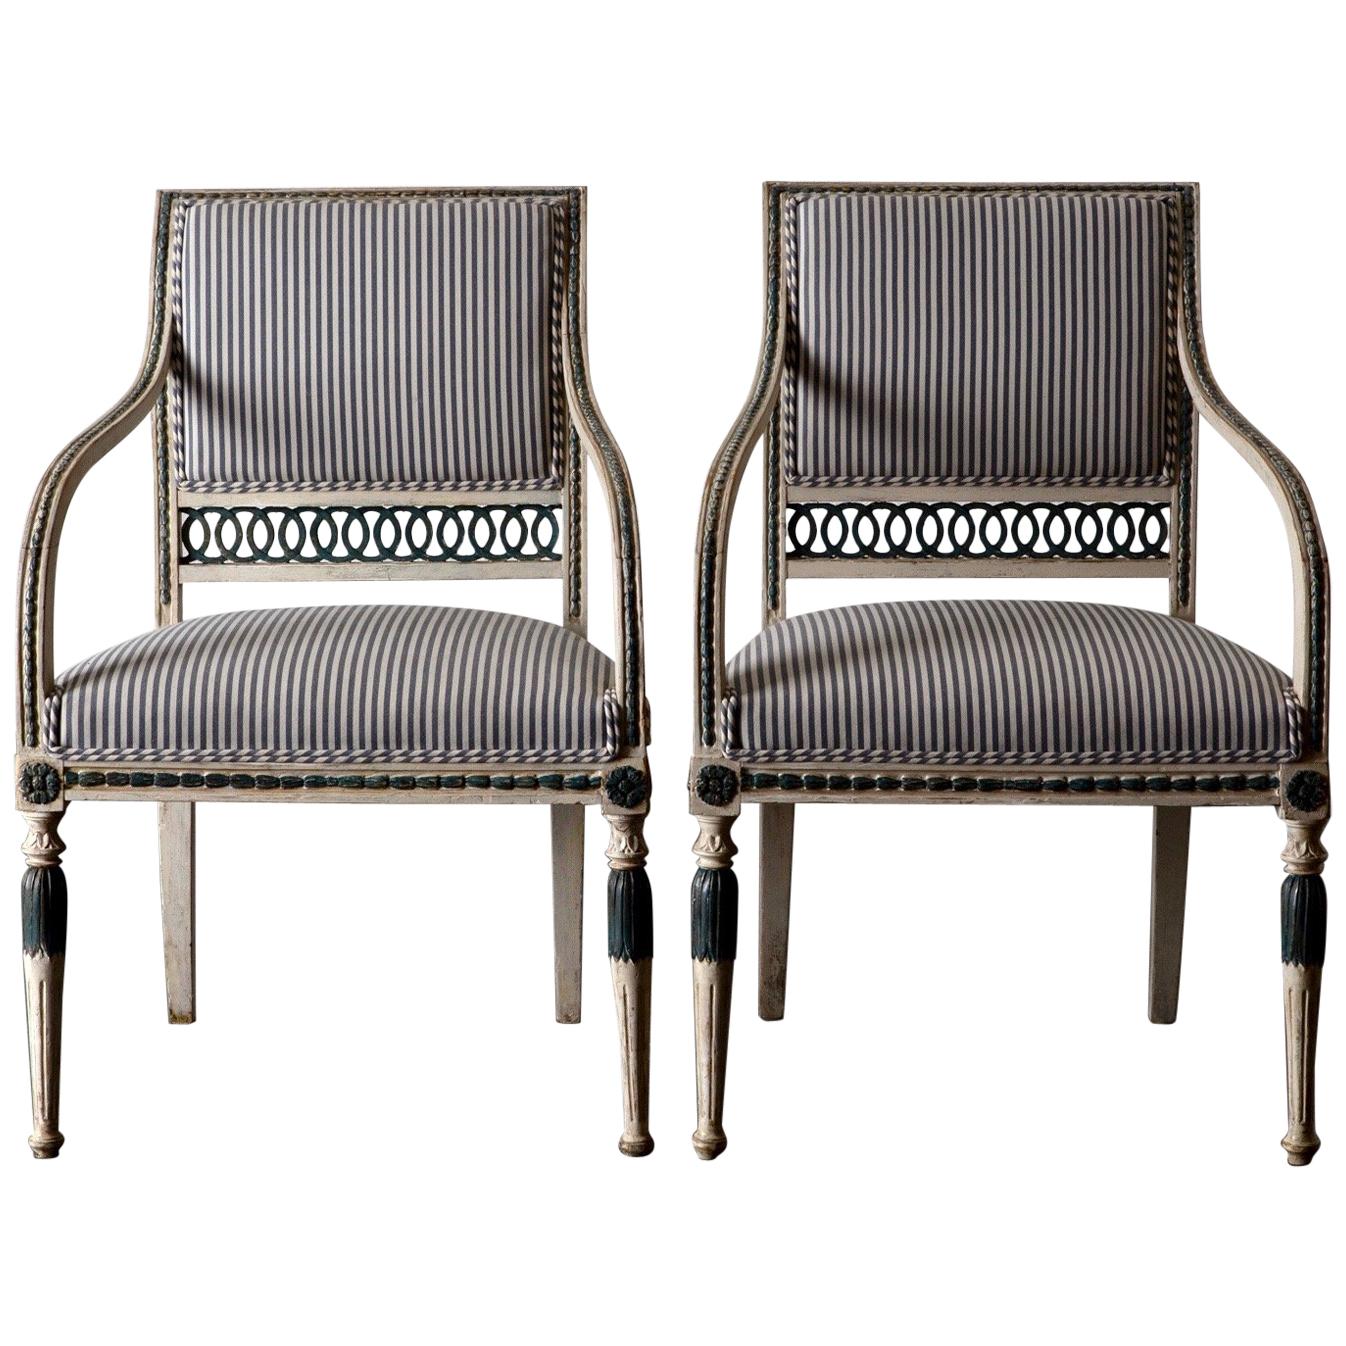 Pair of Swedish Gustavian 18th Century White and Green Armchairs, Sweden